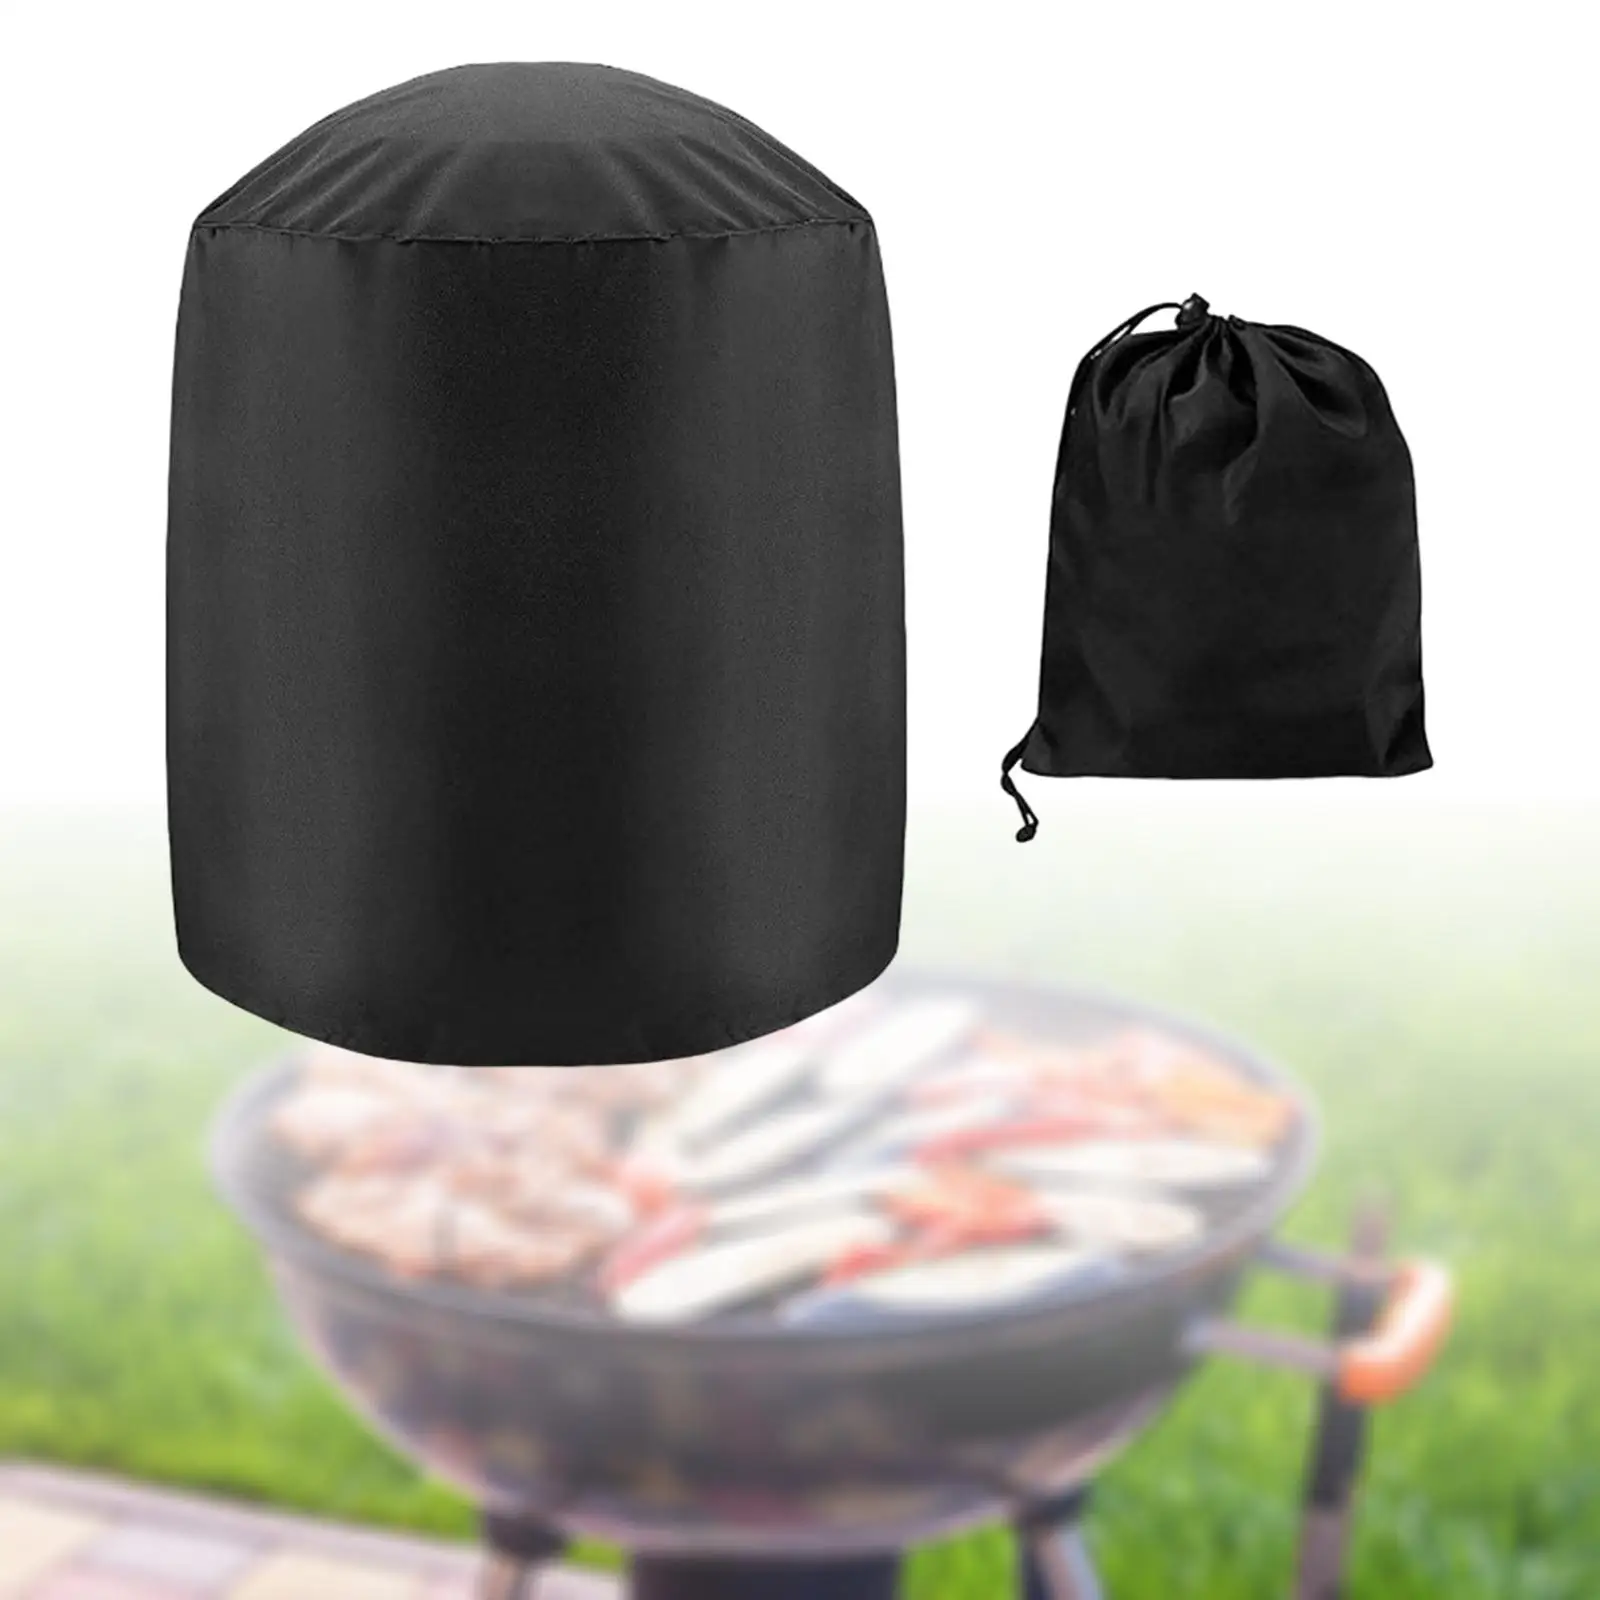 Round Barbecue Grill Cover Folding Windproof Grill Cover Dustproof Waterproof for Barbecue Outdoor Camping